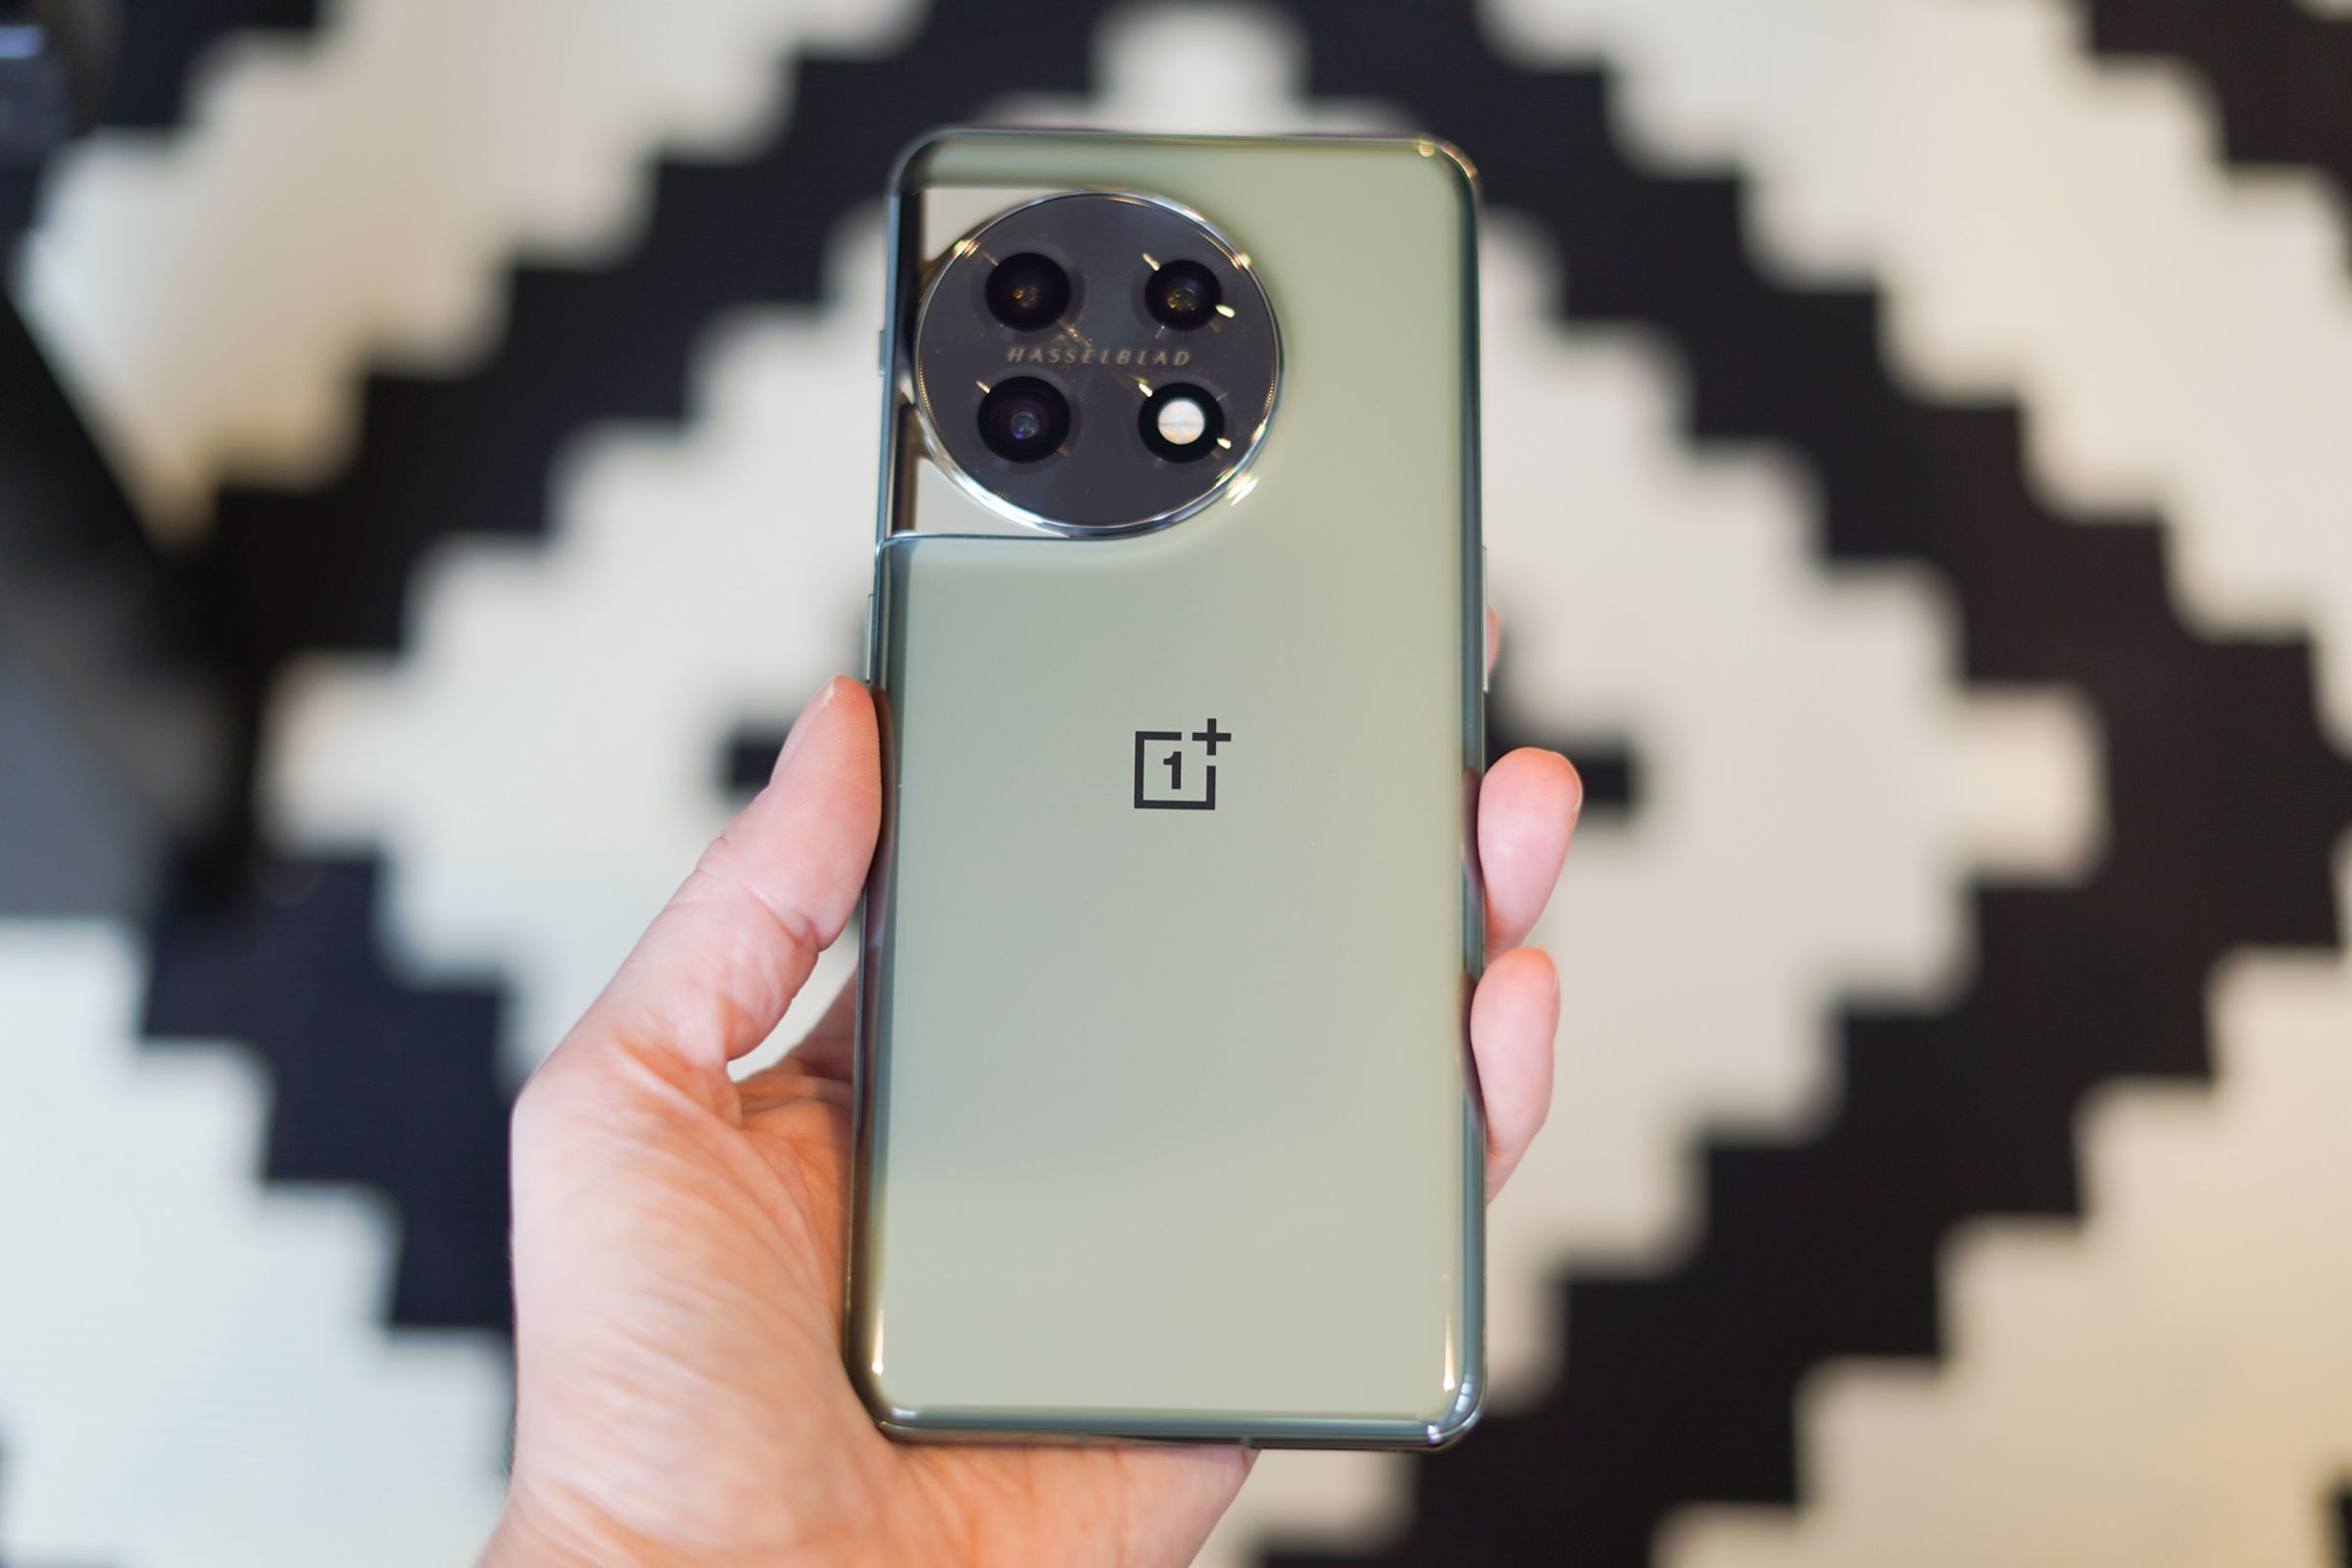 OnePlus in hand showing back panel against a black and white patterned background.